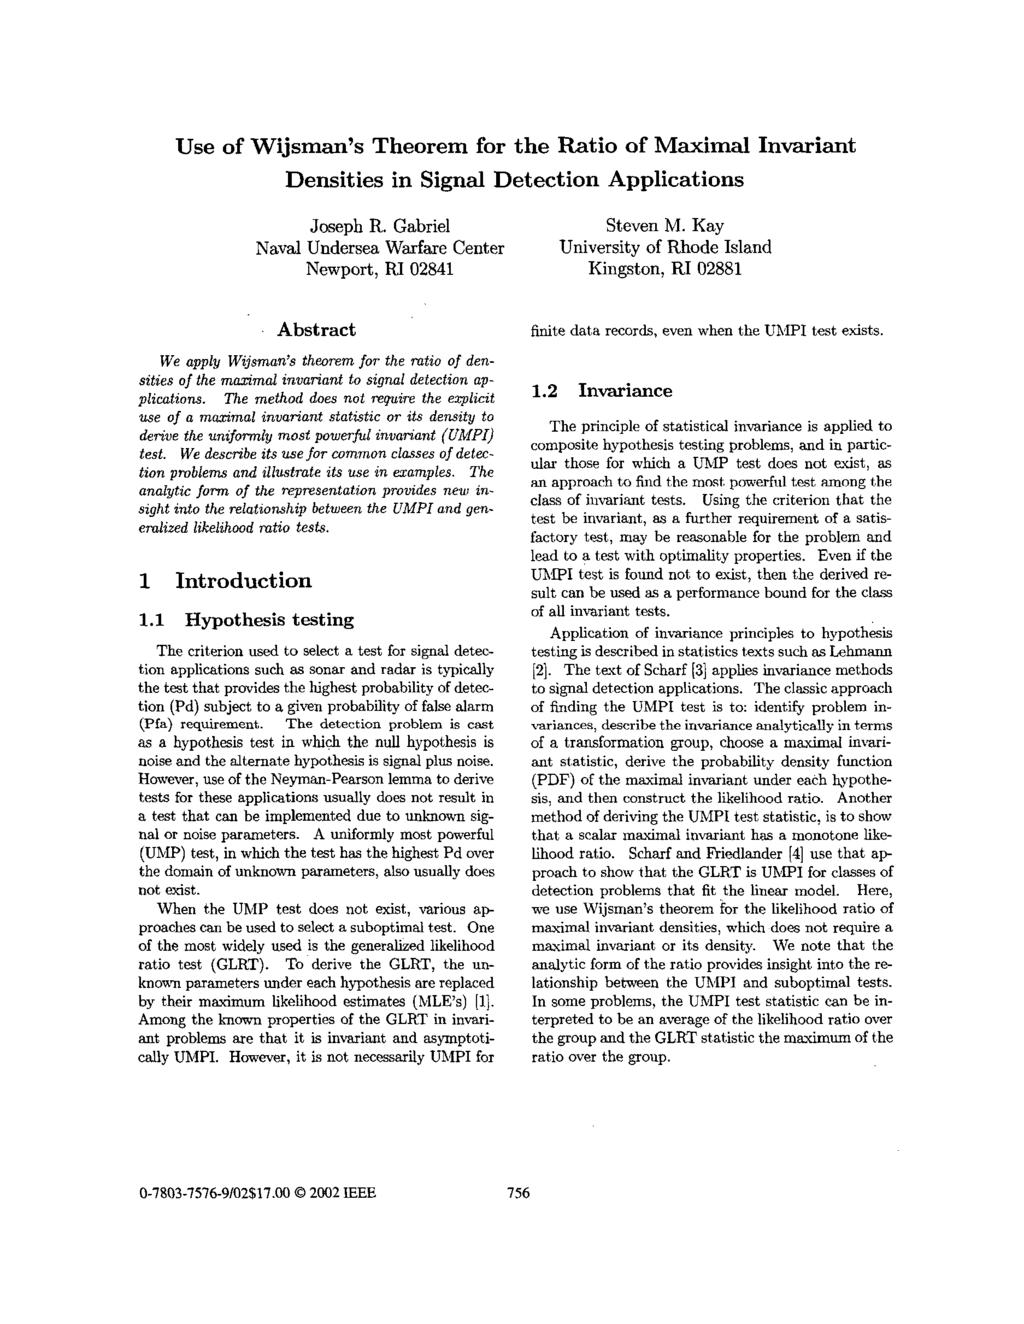 Use of Wijsman's Theorem for the Ratio of Maximal Invariant Densities in Signal Detection Applications Joseph R. Gabriel Naval Undersea Warfare Center Newport, Rl 02841 Steven M.